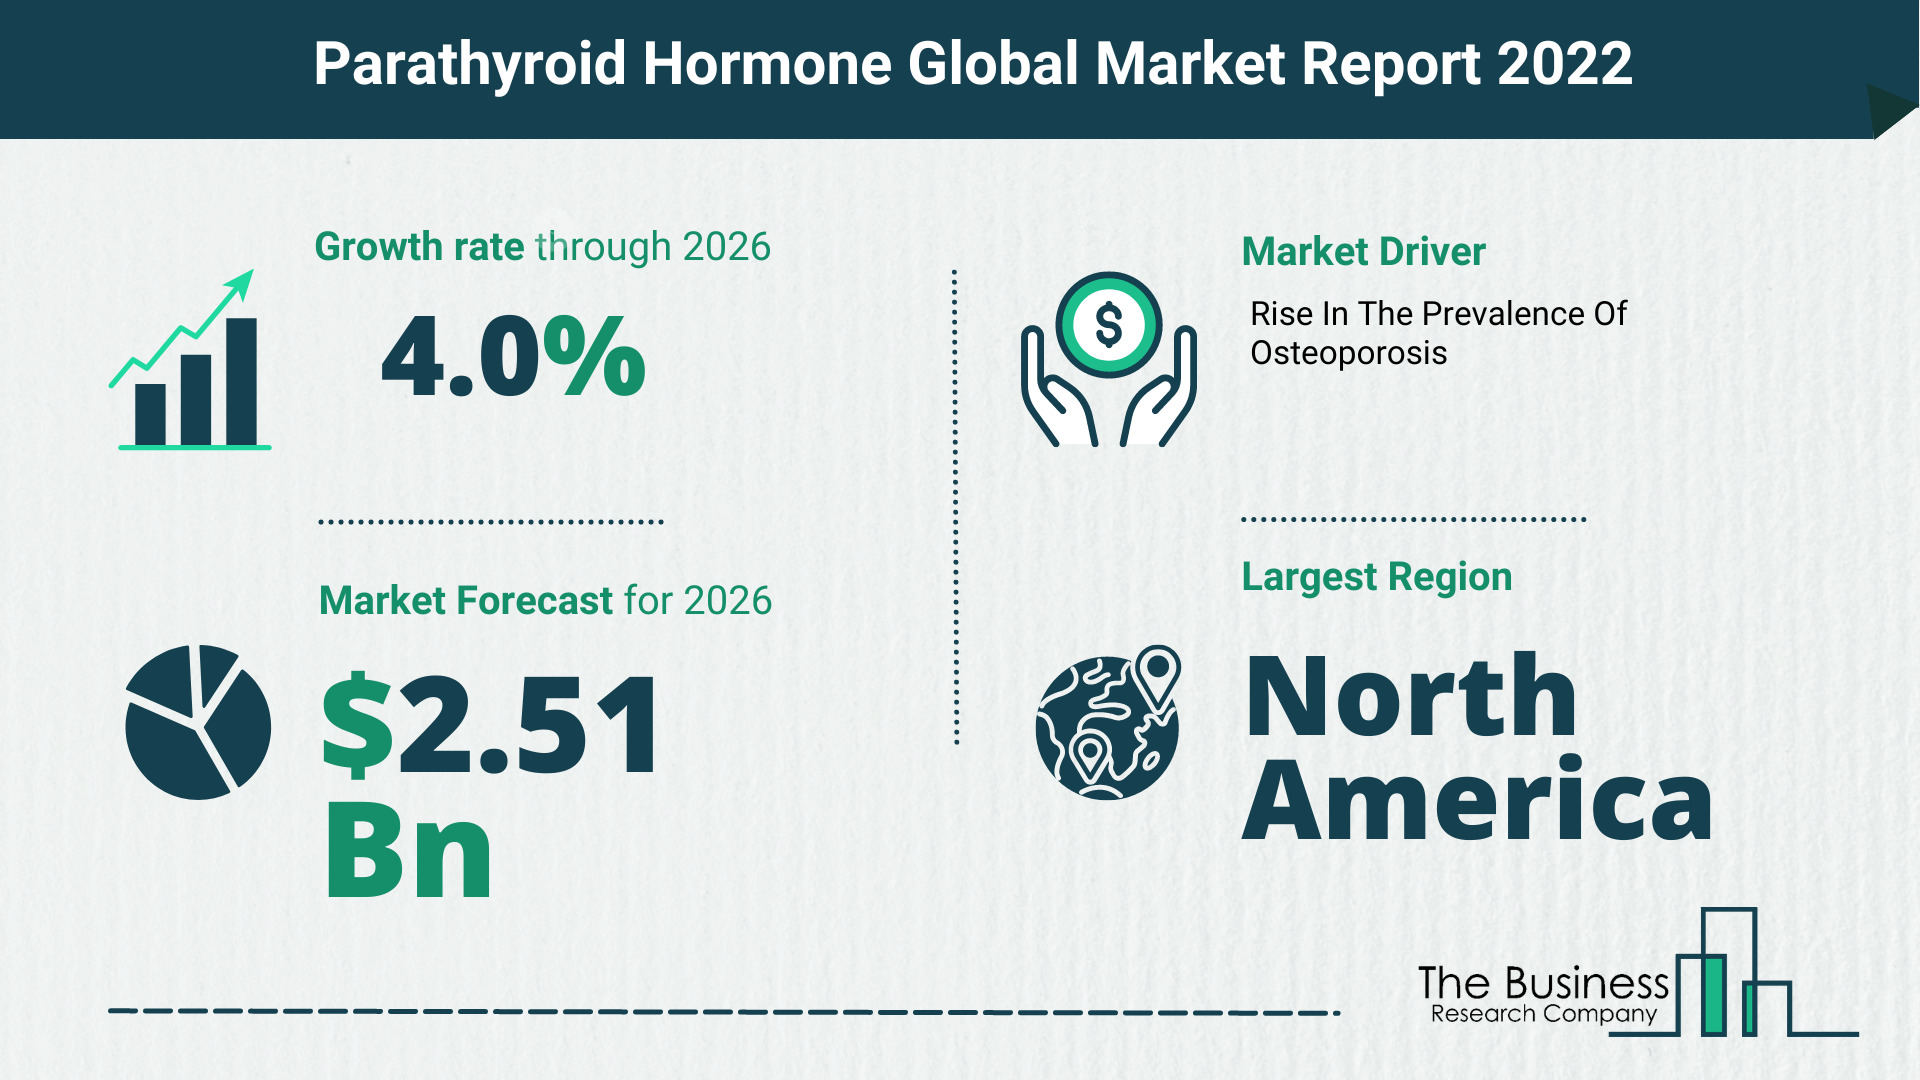 What Is The Parathyroid Hormone Market Overview In 2022?